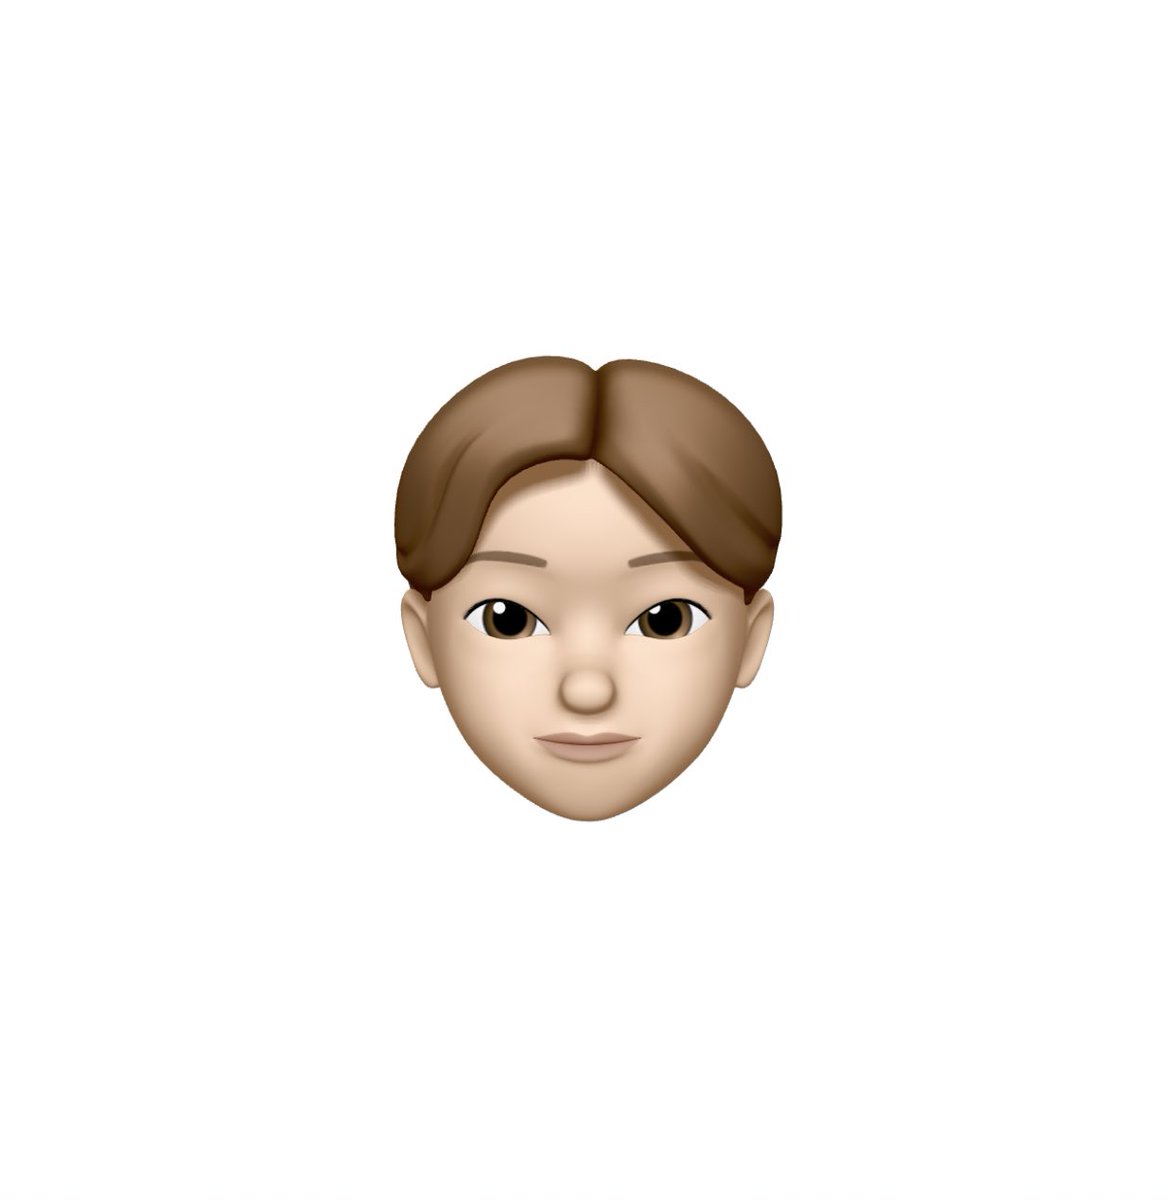 nct dream reload teaser photos as memojis - a very inaccurate but cute thread  #NCTDREAM_Reload